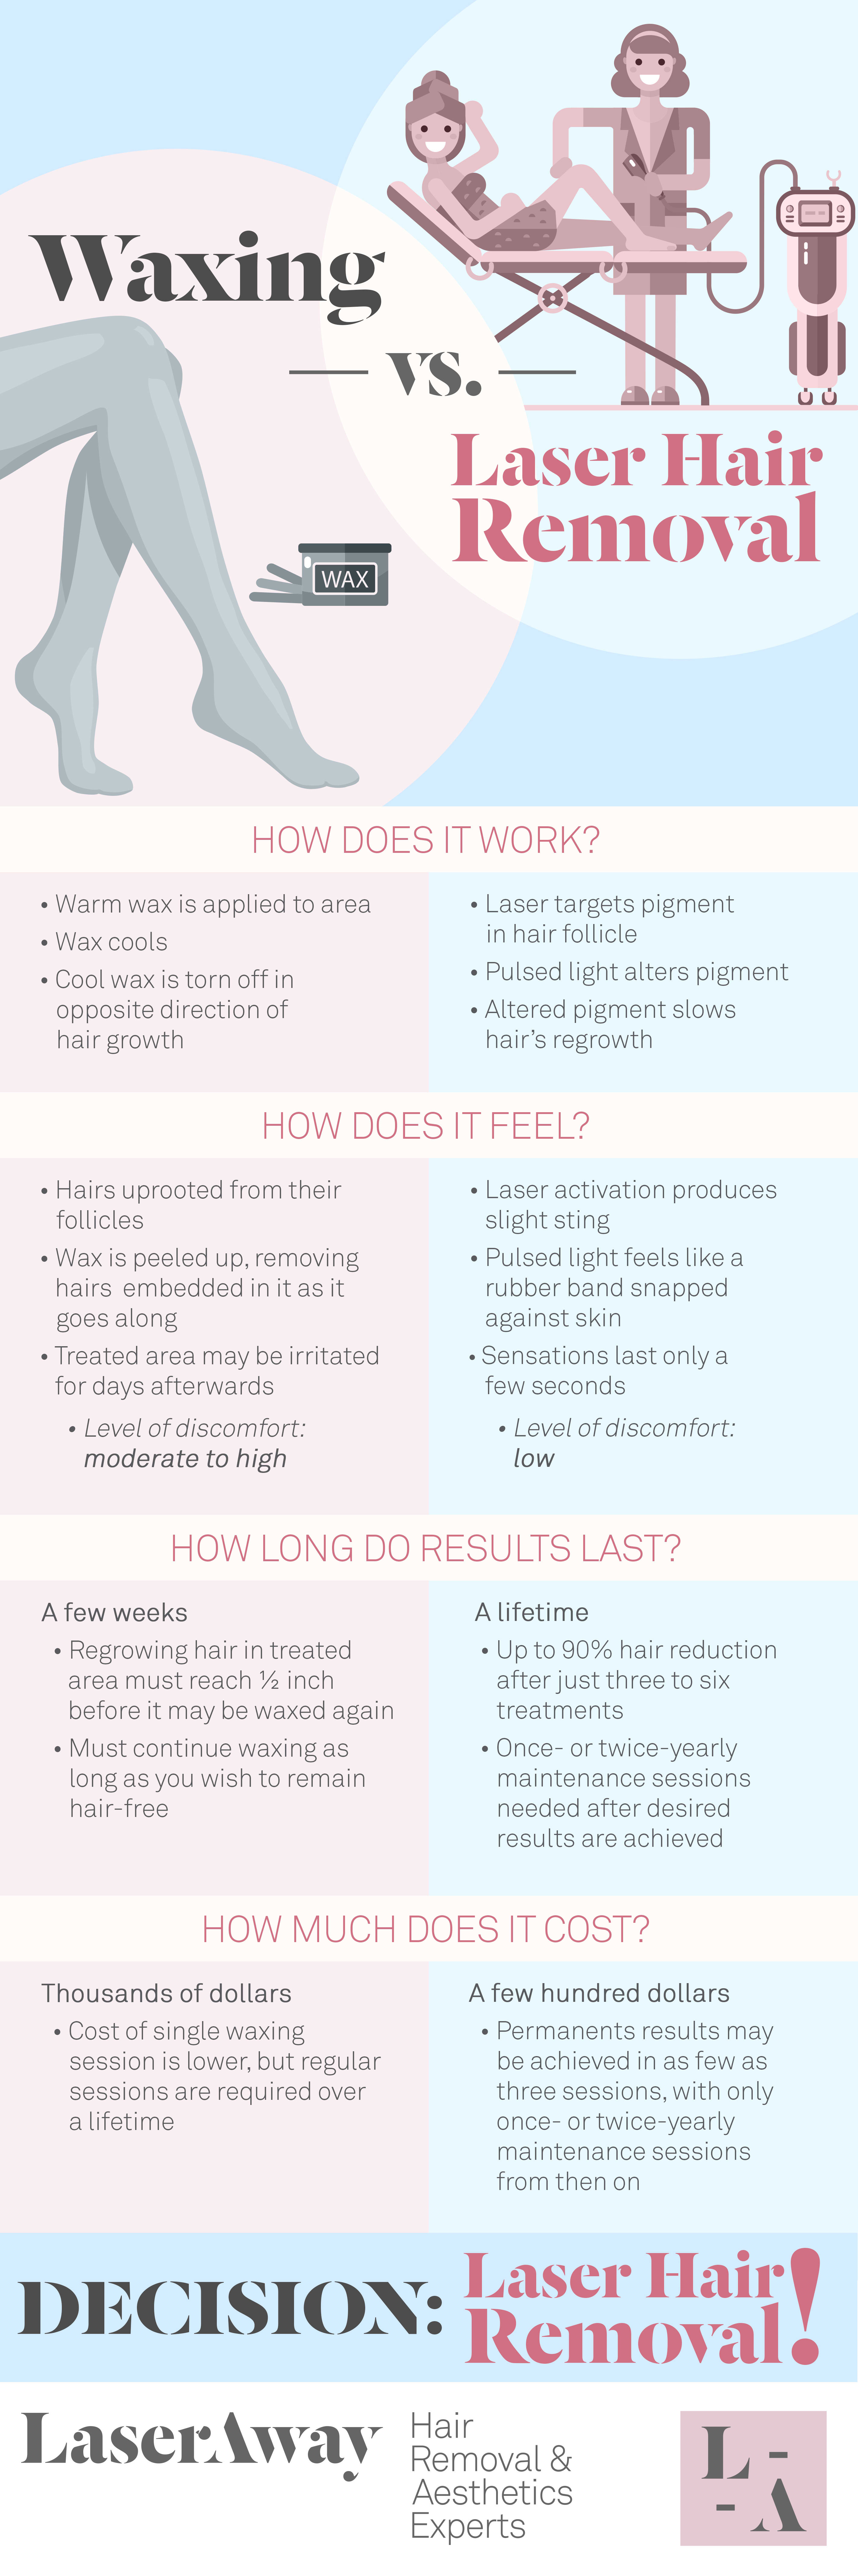 Laser away post image for Waxing vs. Laser Hair Removal